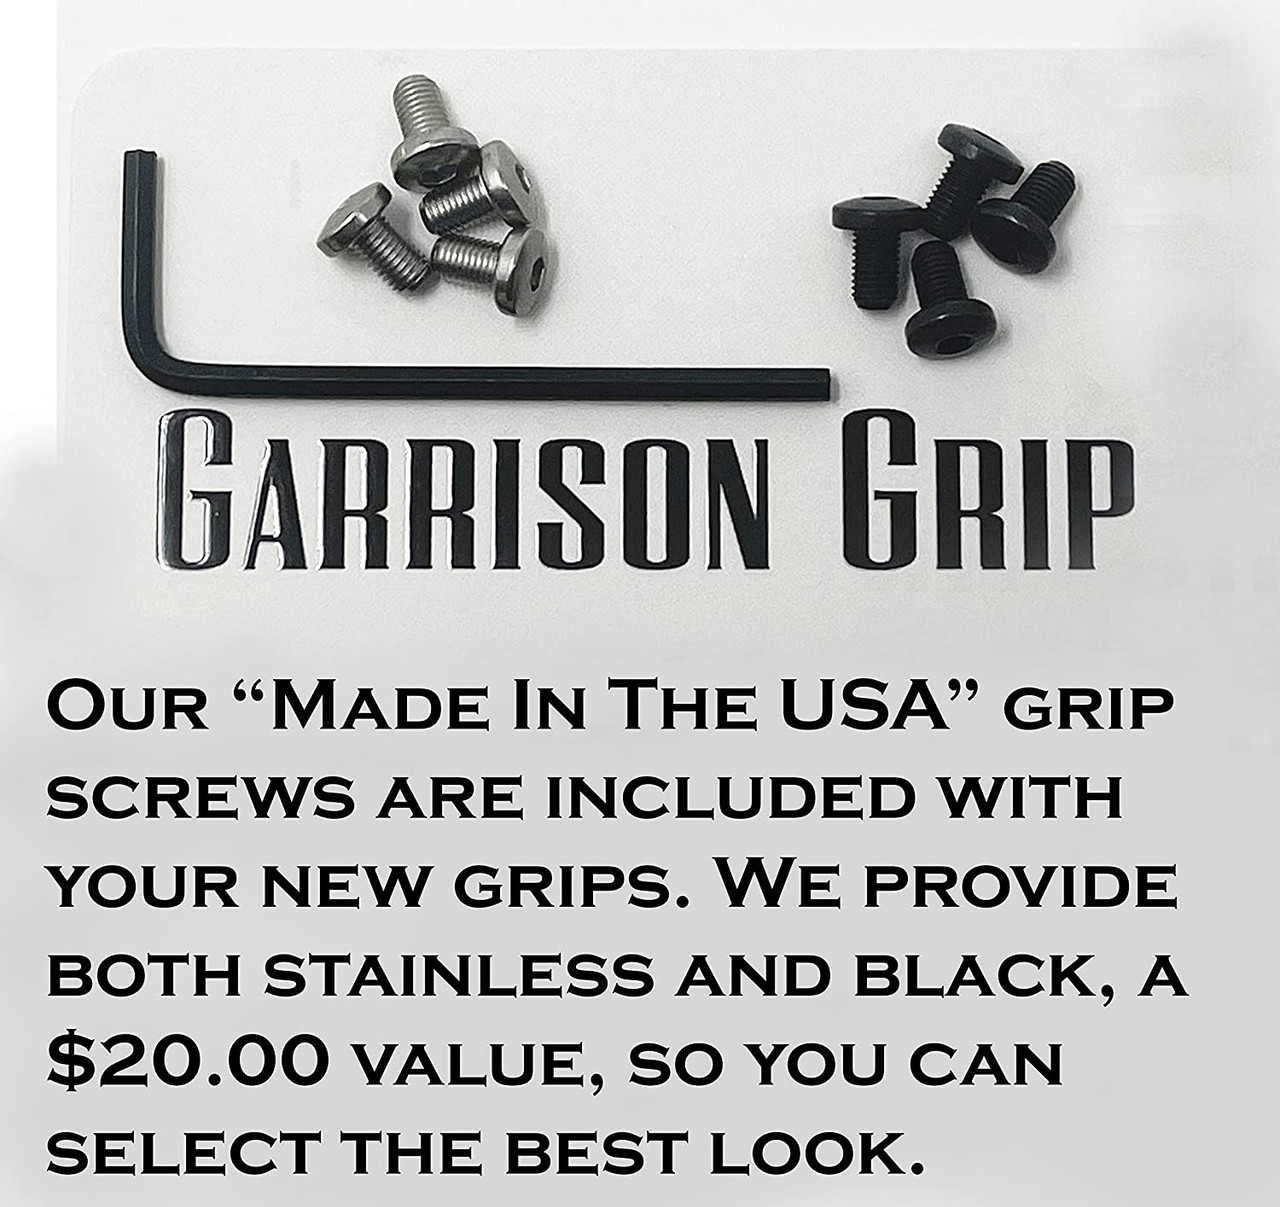 Garrison Grip All New 1911 "USA" Ultimate Ambi Grips Fit Colt A1 & Commander. Also Fits Clones. Tactical Grade Polymer with Micro-Sand Finish for Superior Handling (Grips and Screw Set Only)